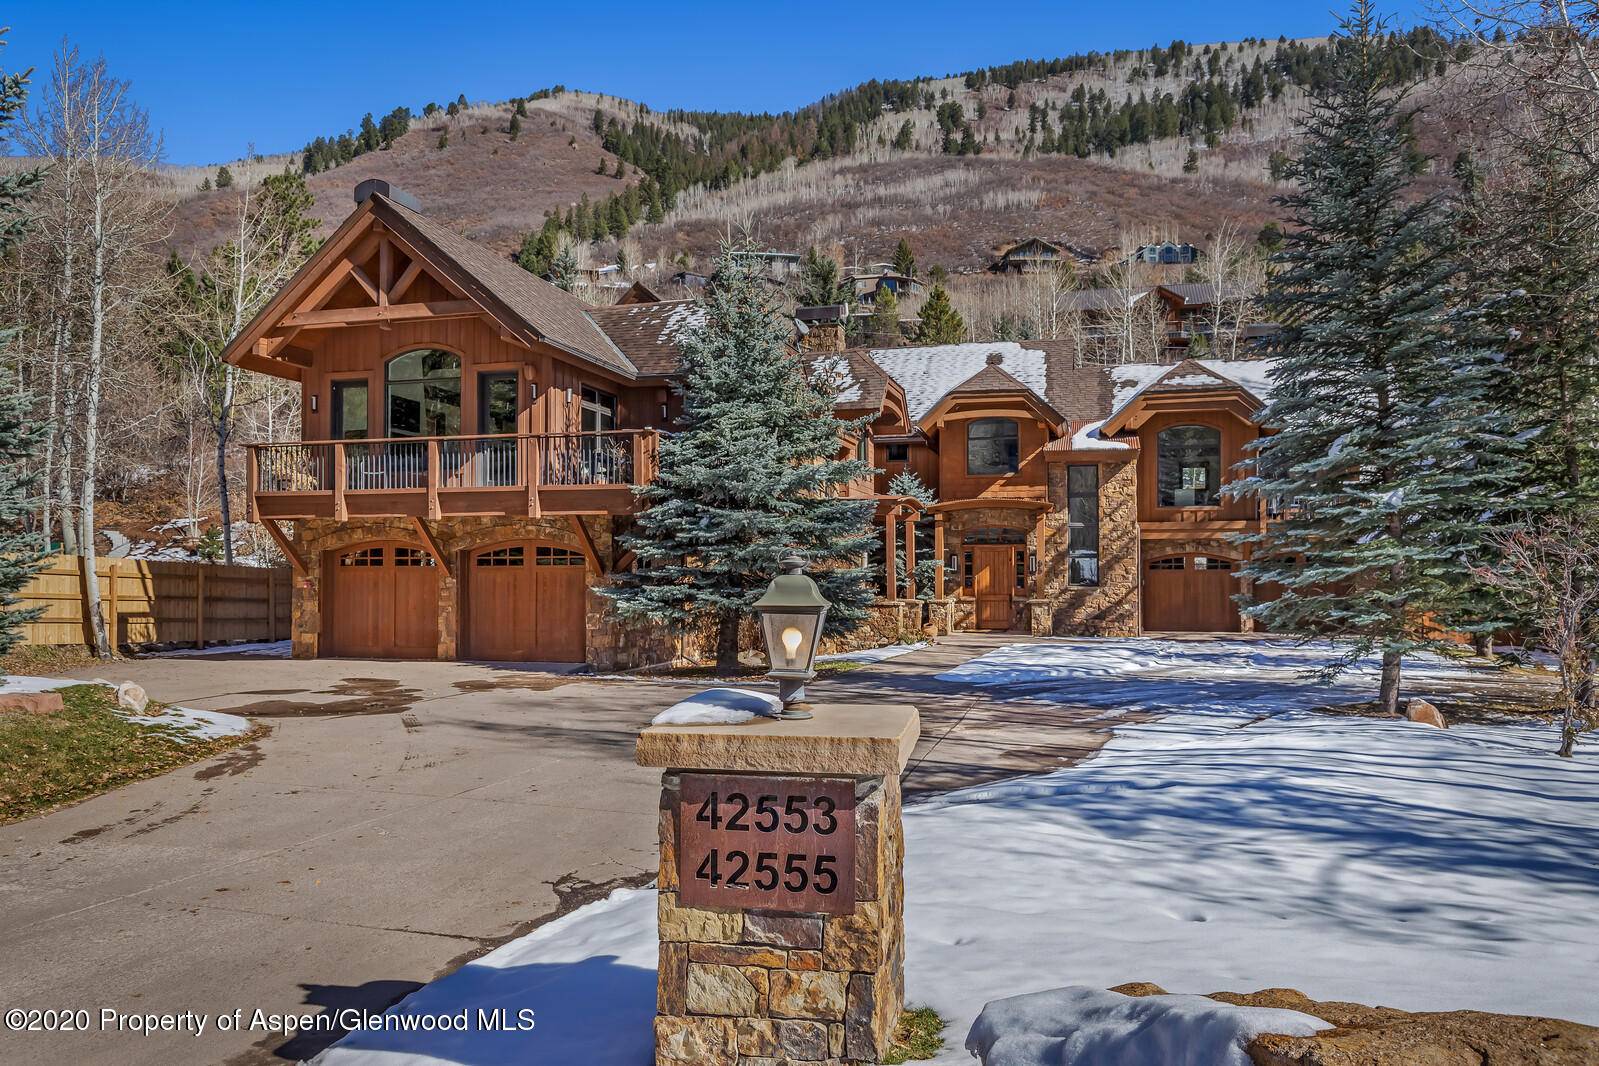 Just minutes from downtown Aspen.